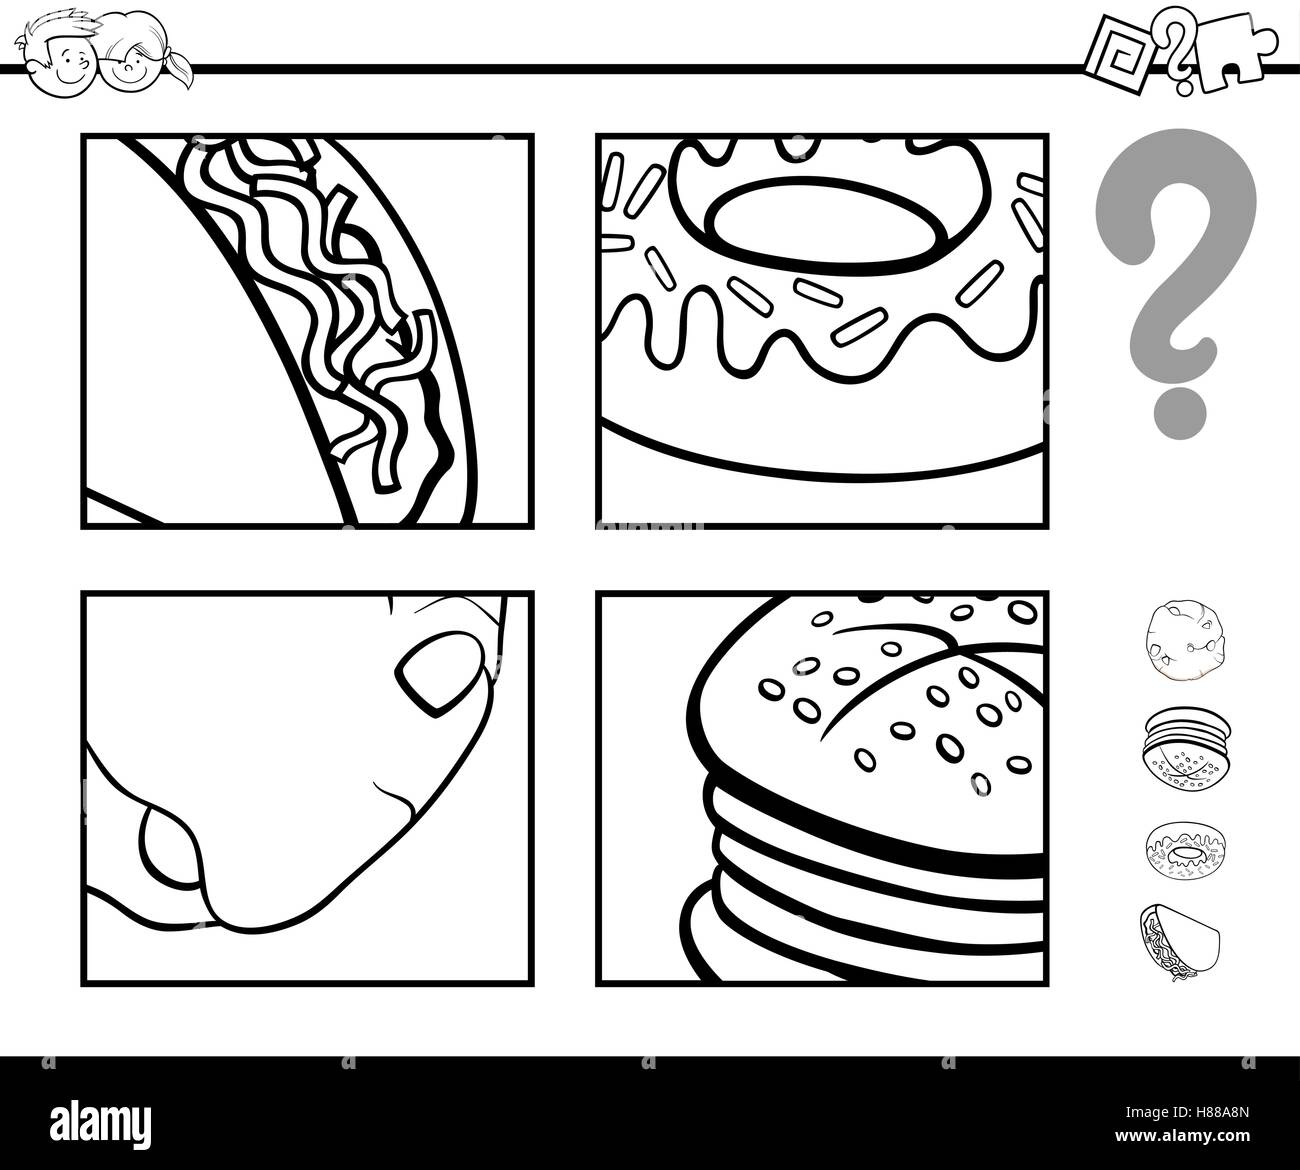 Black and White Cartoon Illustration of Educational Activity Task of Guessing Food Objects for Children Coloring Page Stock Vector